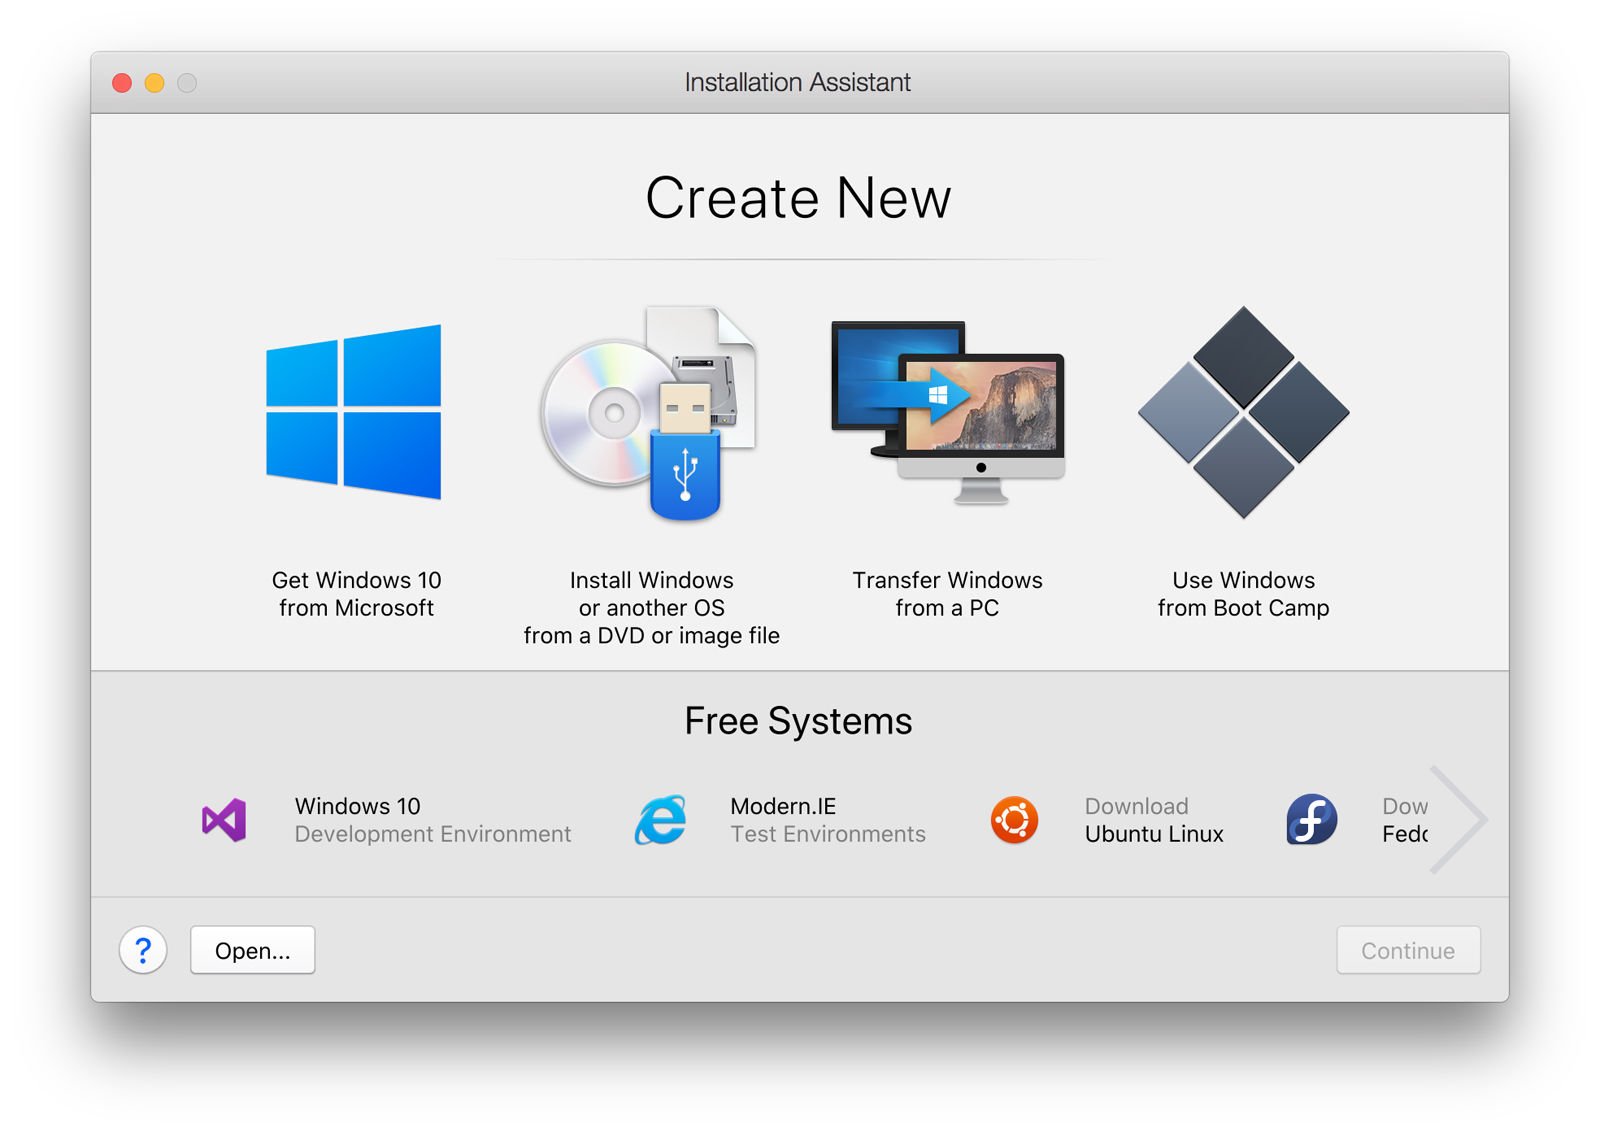 install drivers for windows 10 on mac